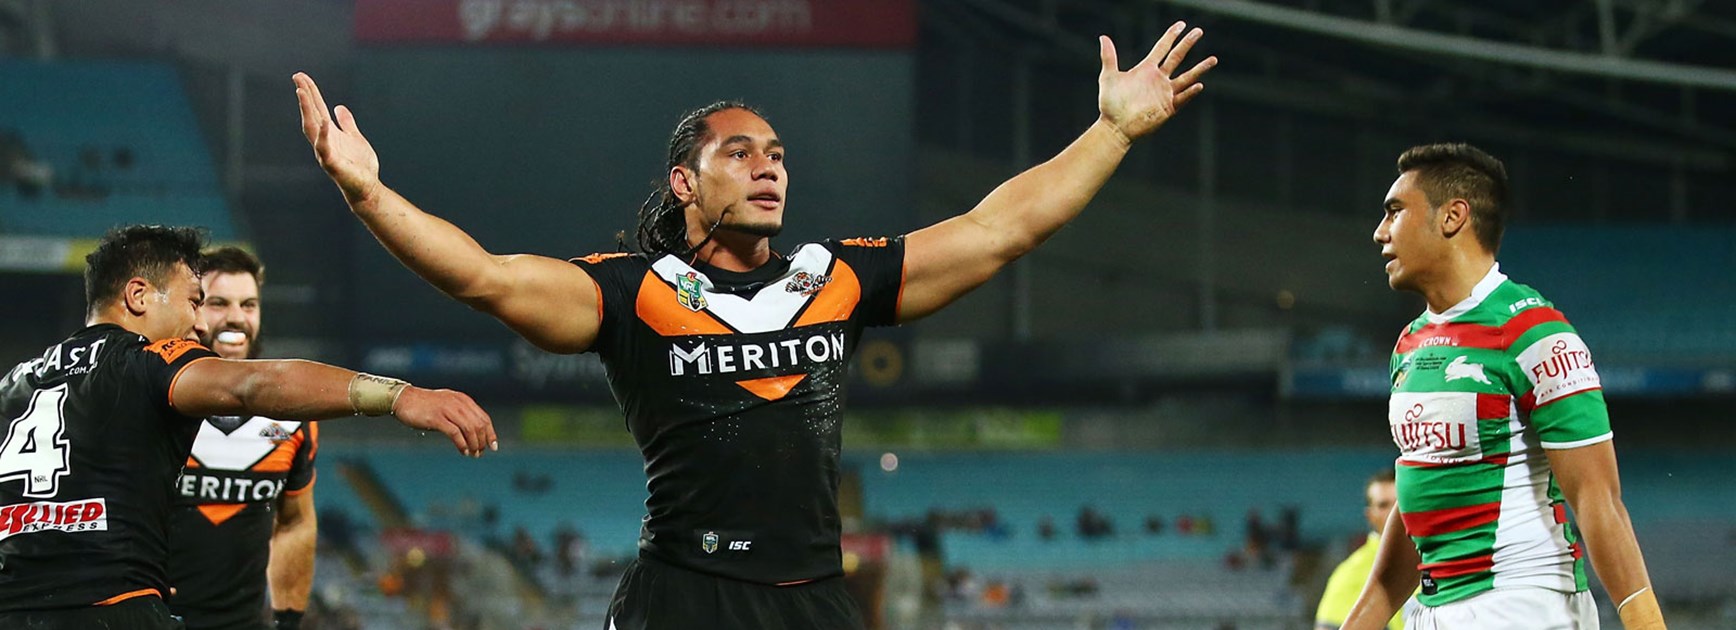 John Olive had a tough NRL debut as the Rabbitohs went down 34-6 to the Wests Tigers in Round 14 last year.